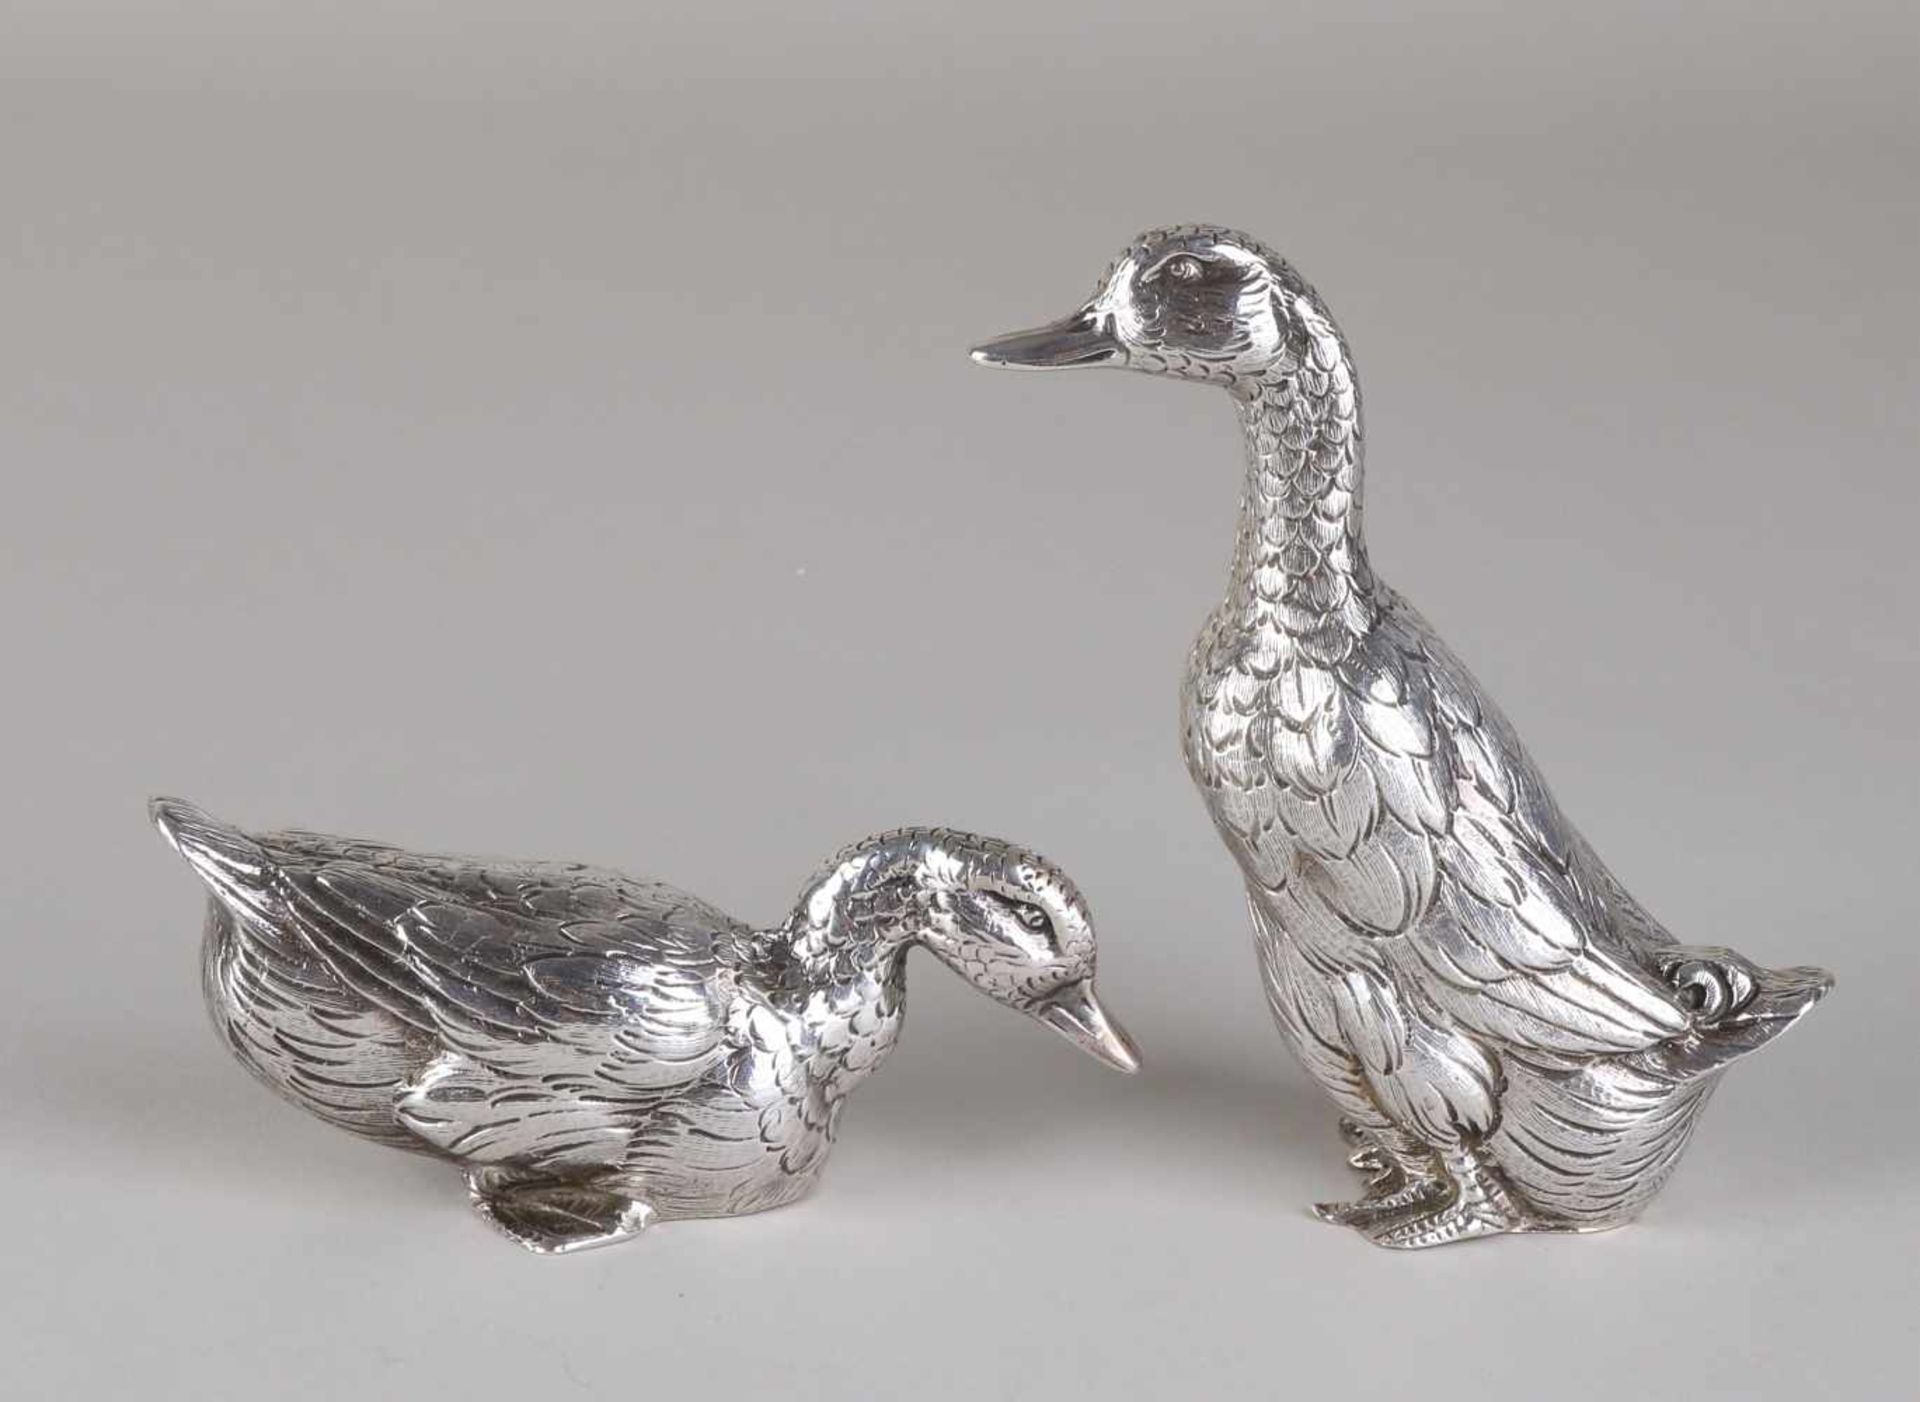 Silver table pieces from a pair of ducks, 925/000. Sitting once, standing once. Unknown brands.